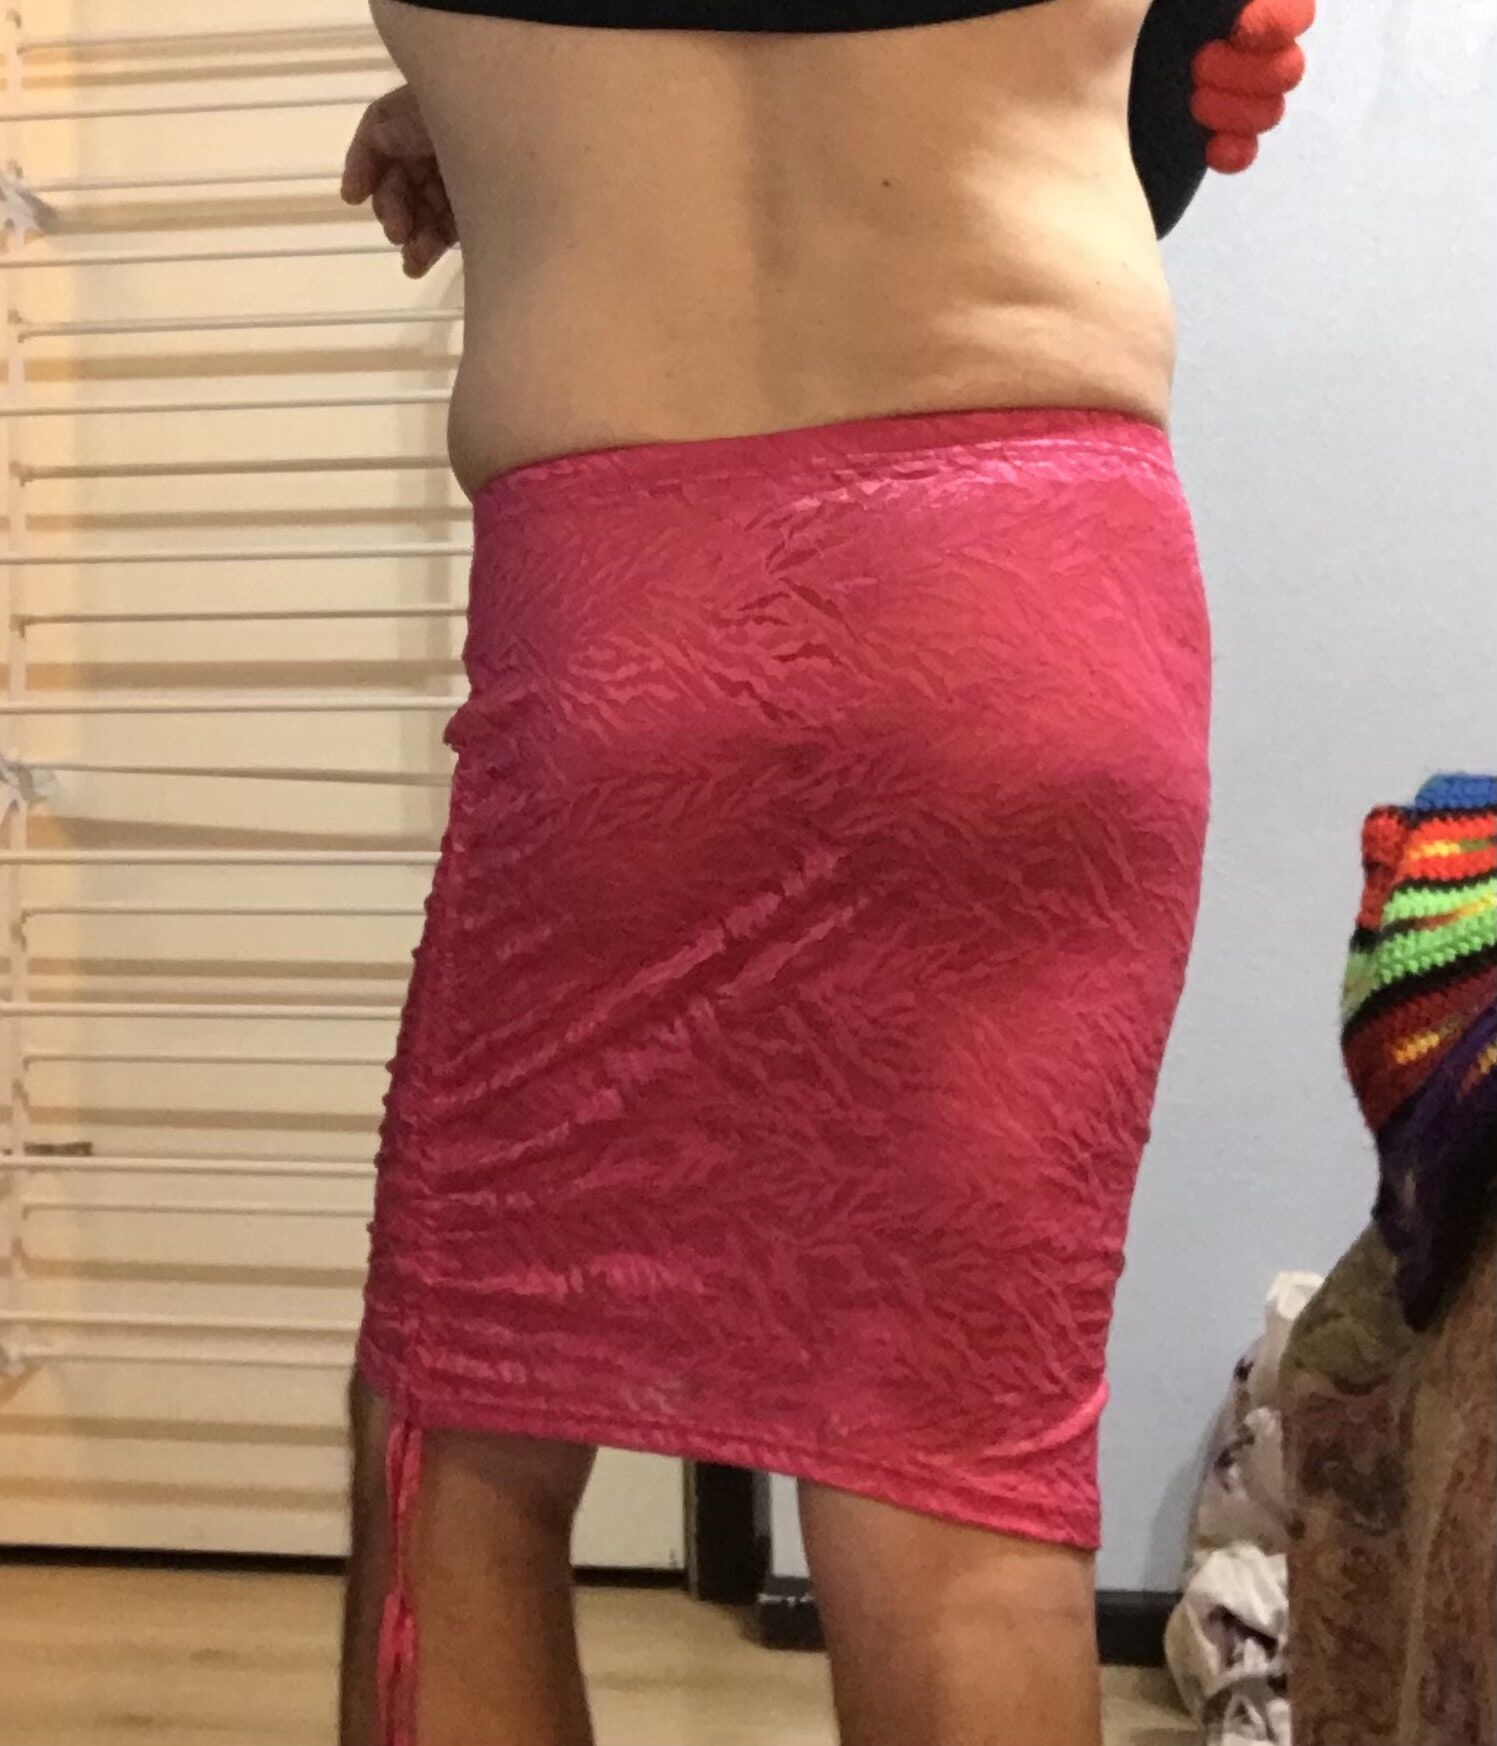 My lil bulge in some skirts #31